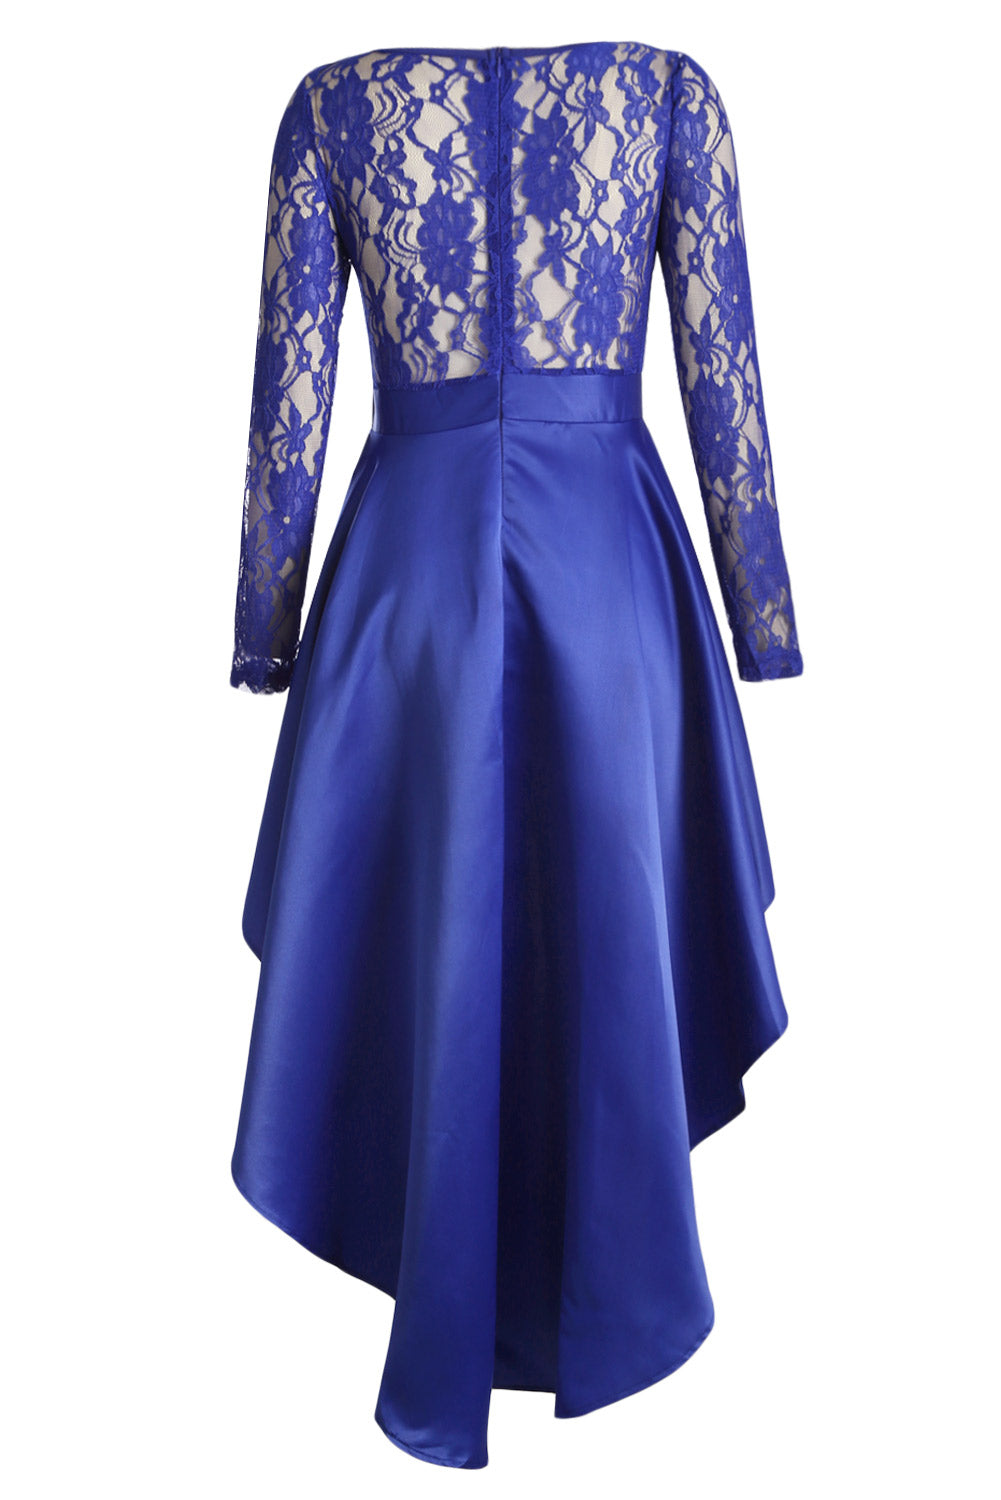 Royal Blue Lace Long Sleeve High Low Satin Prom Dress